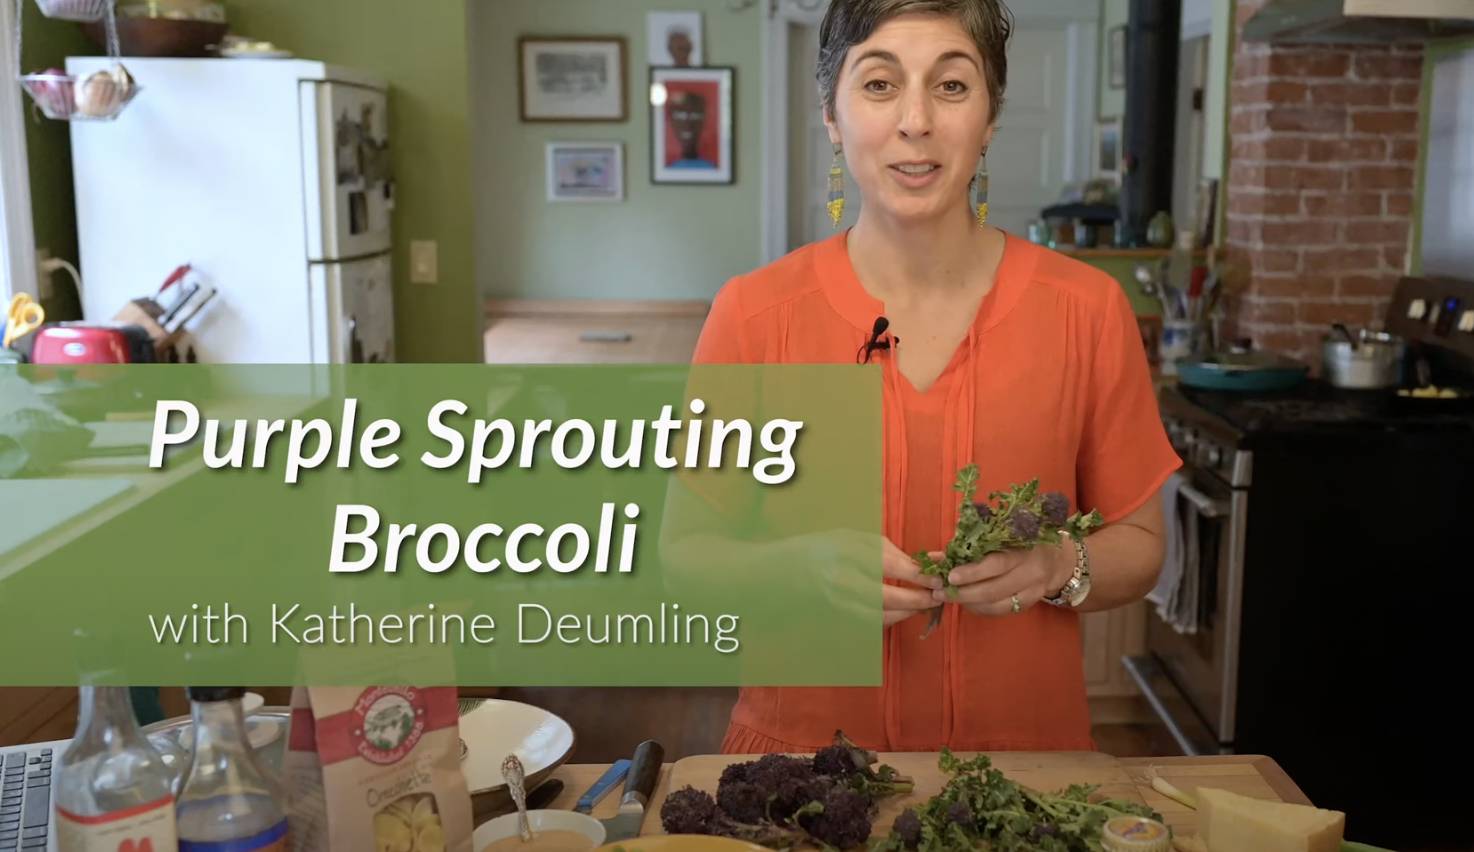 Purple Sprouting Broccoli Recipes with Katherine Deumling